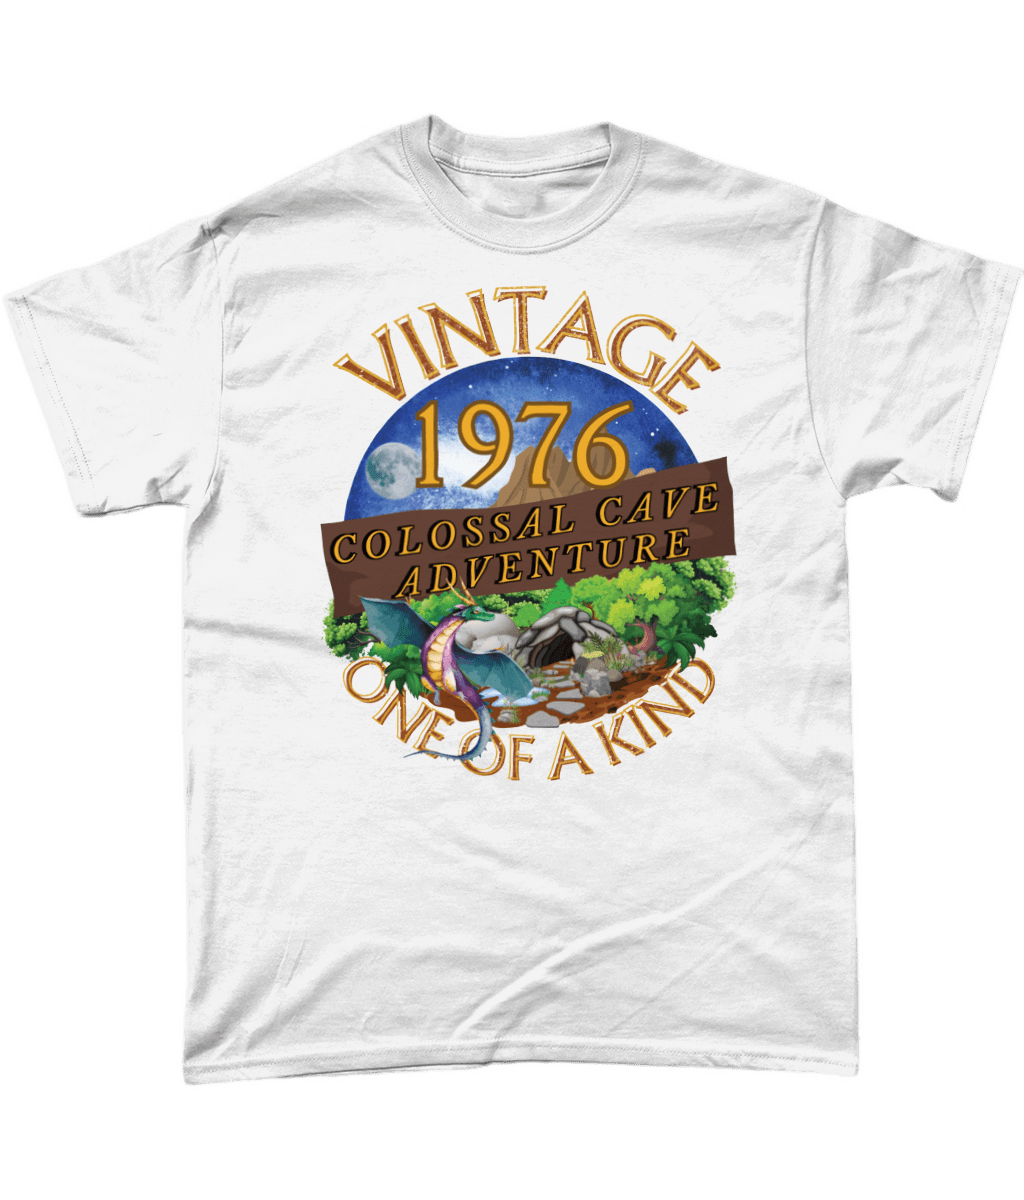 White T-Shirt with words vintage,1976,colossal cave adventure,one of a kind,circular picture of a dragon,cave and woodland,night sky